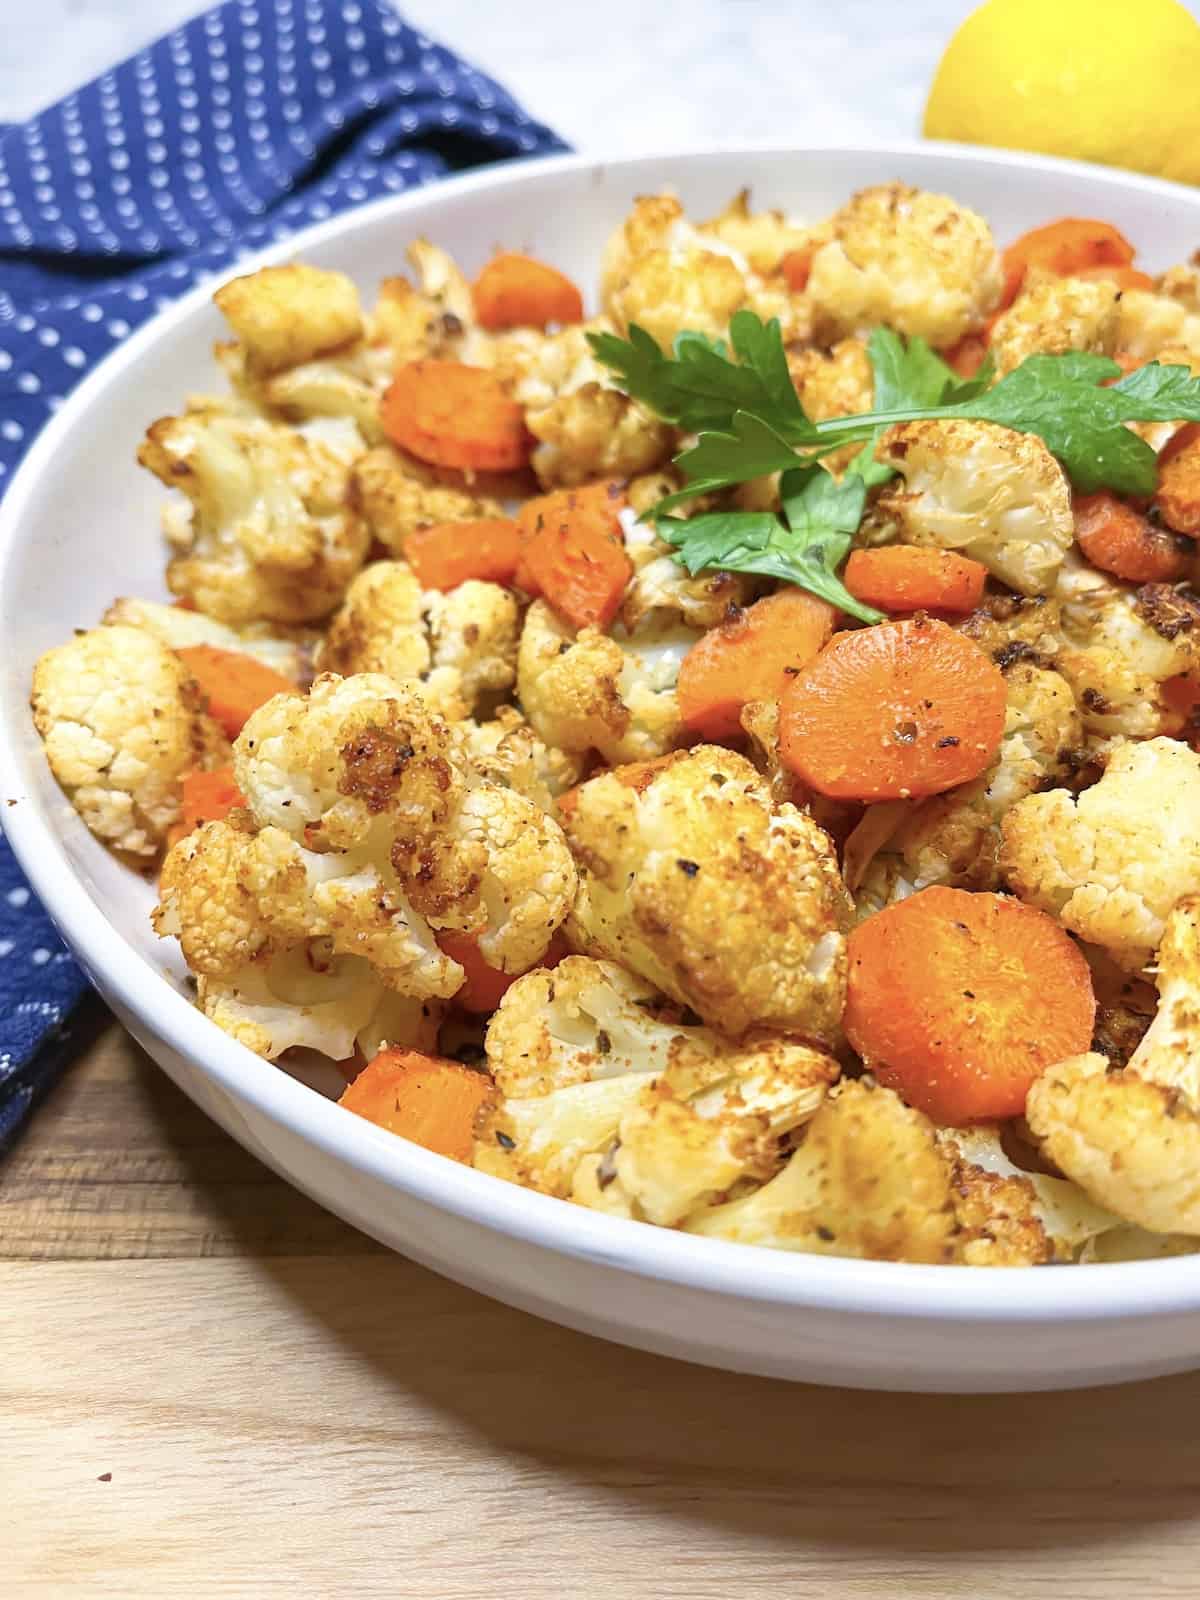 roasted cauliflower and carrots with lemon behind it